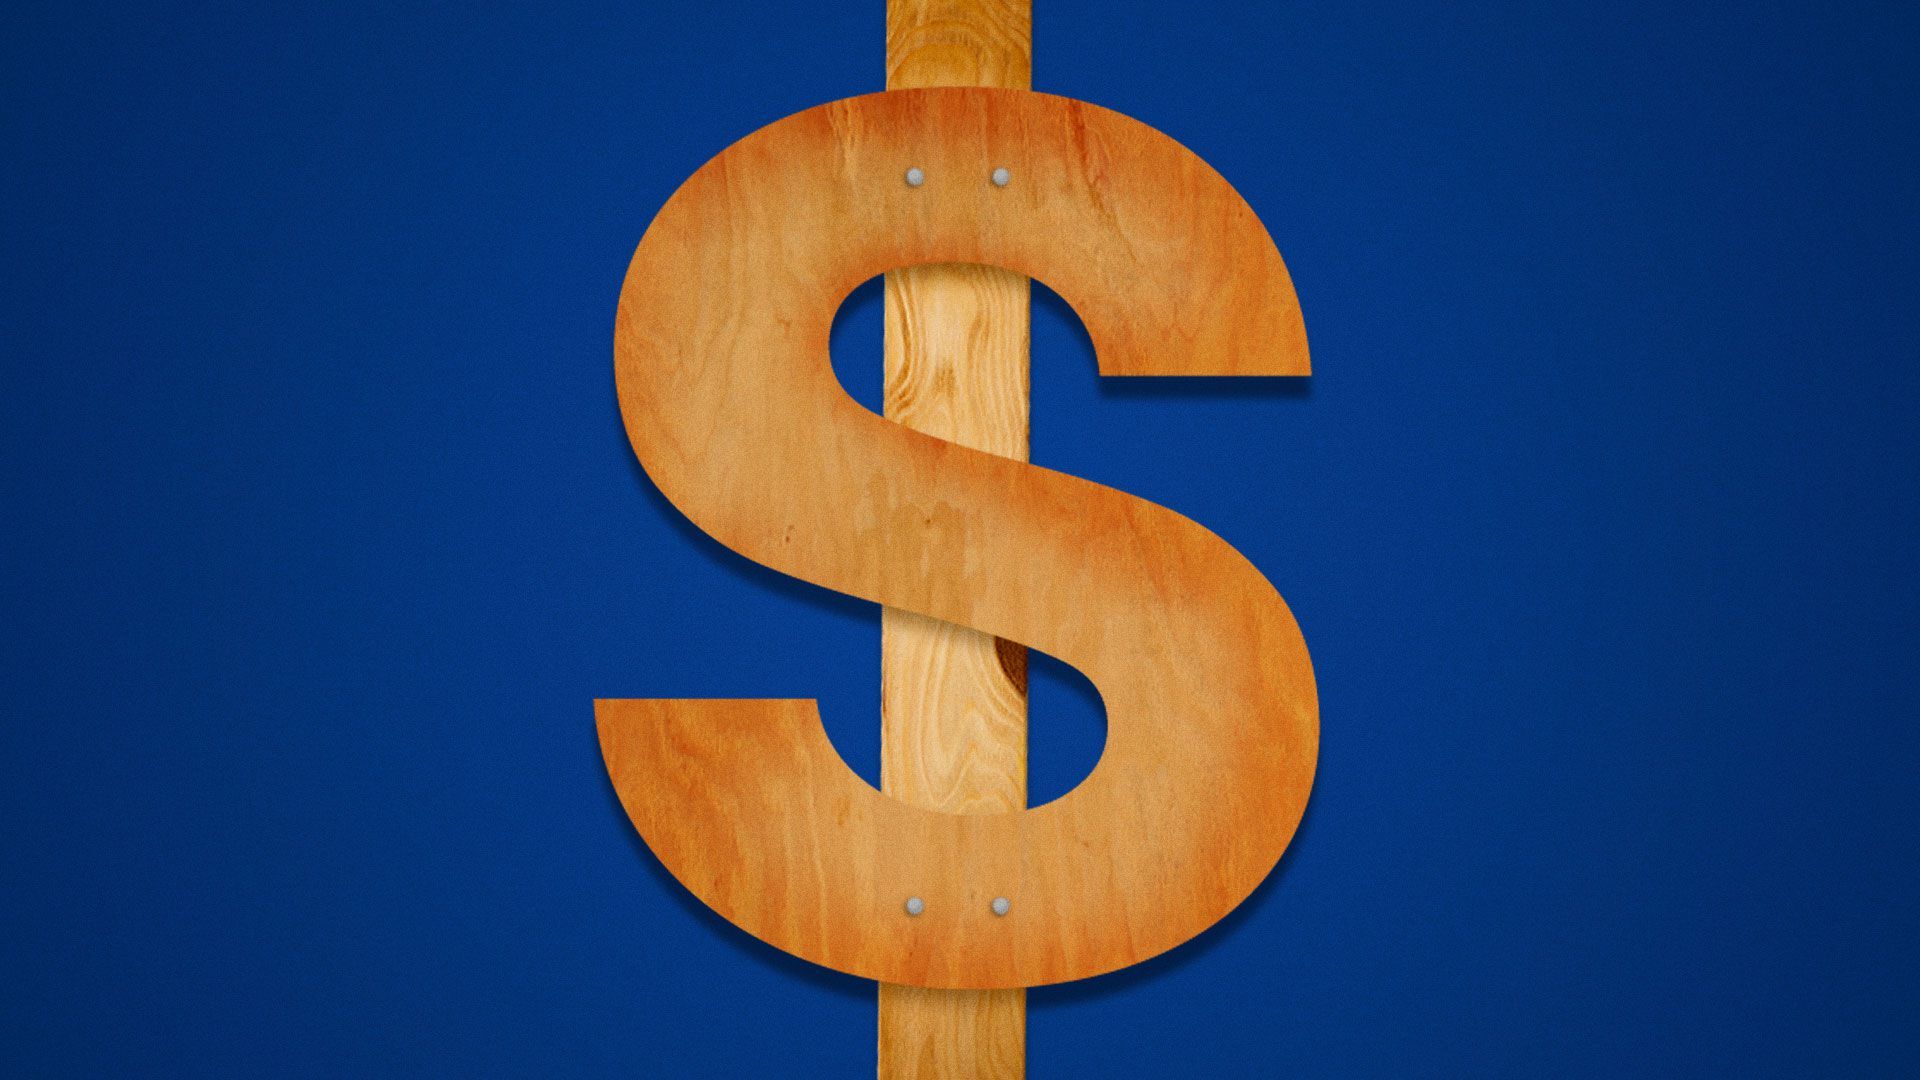 Illustration of a dollar sign made of wood